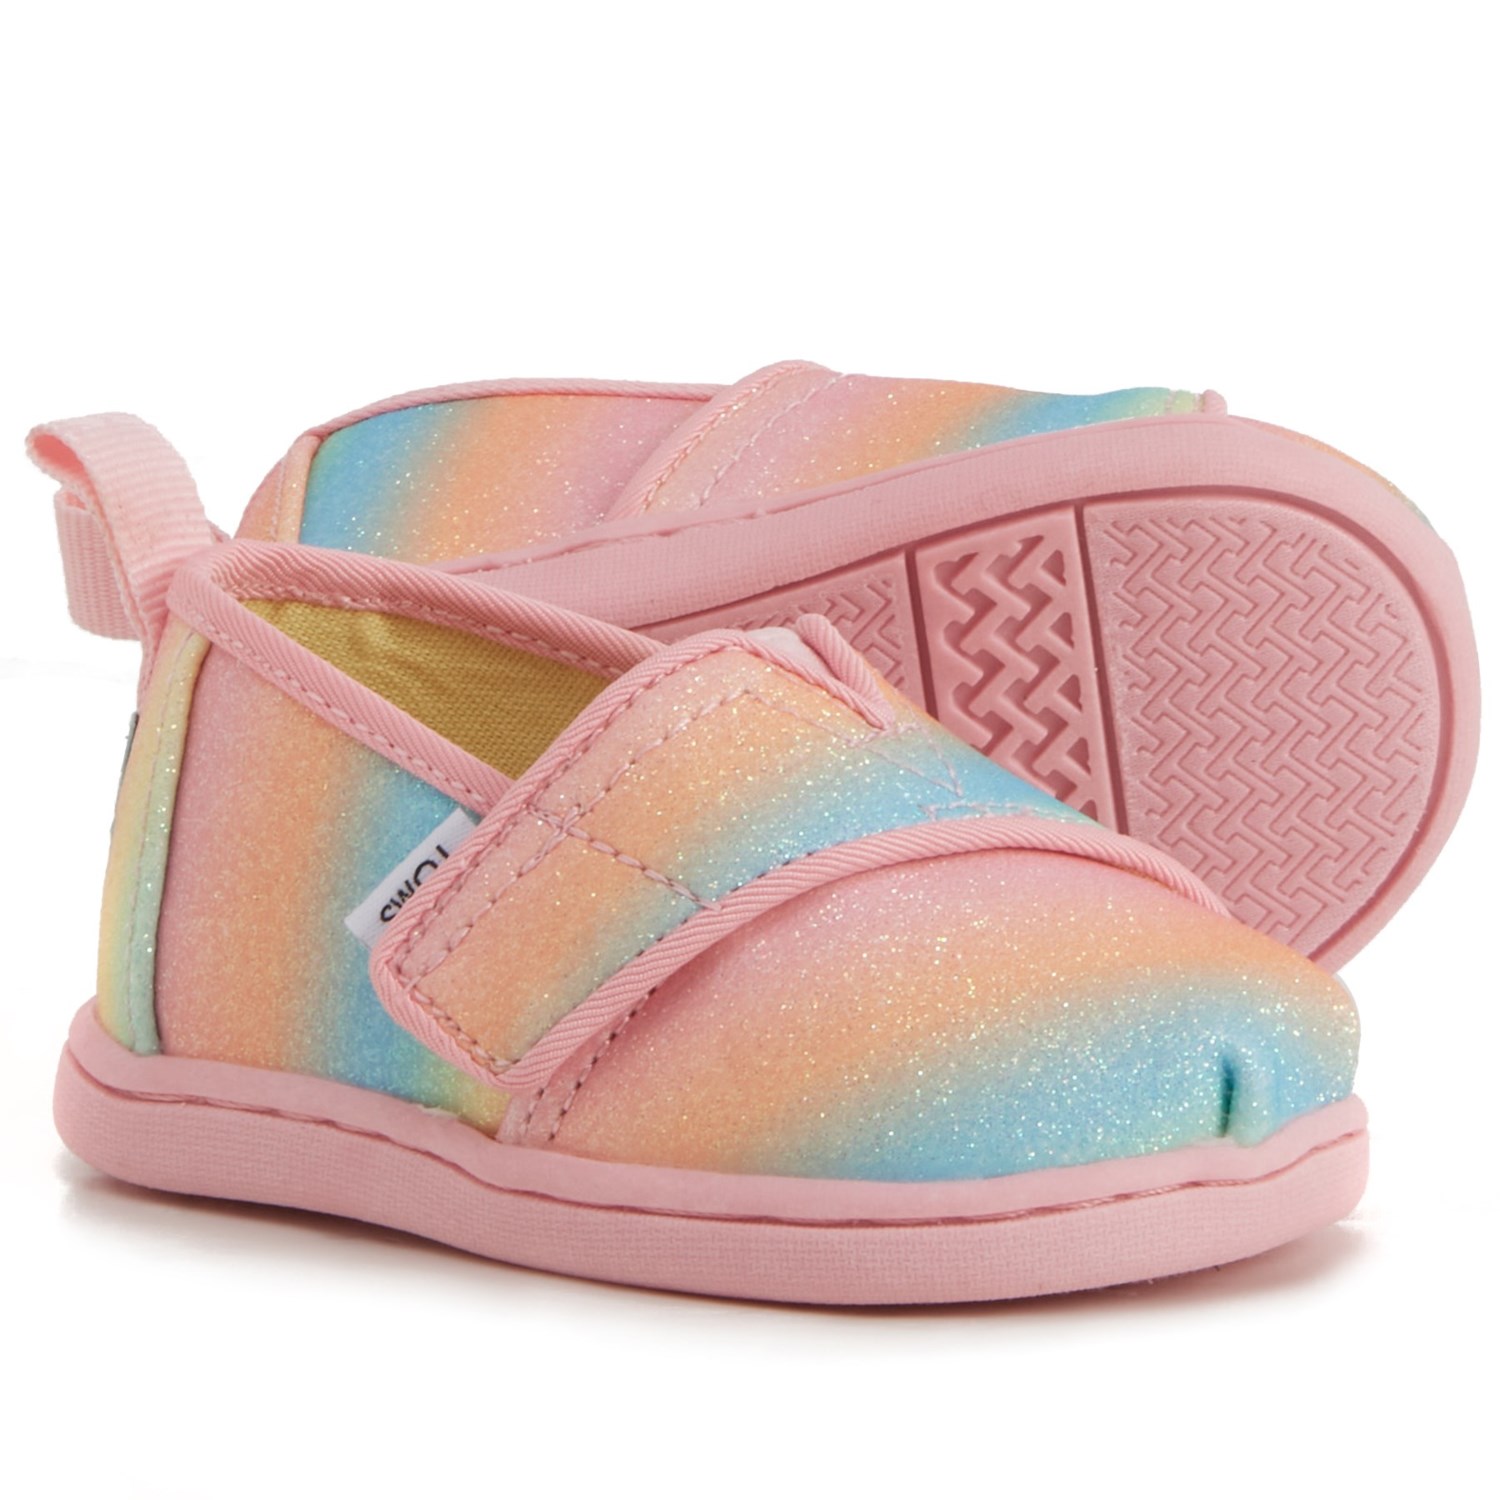 TOMS Infant and Toddler Girls Gradient Glitter Alpargata Shoes